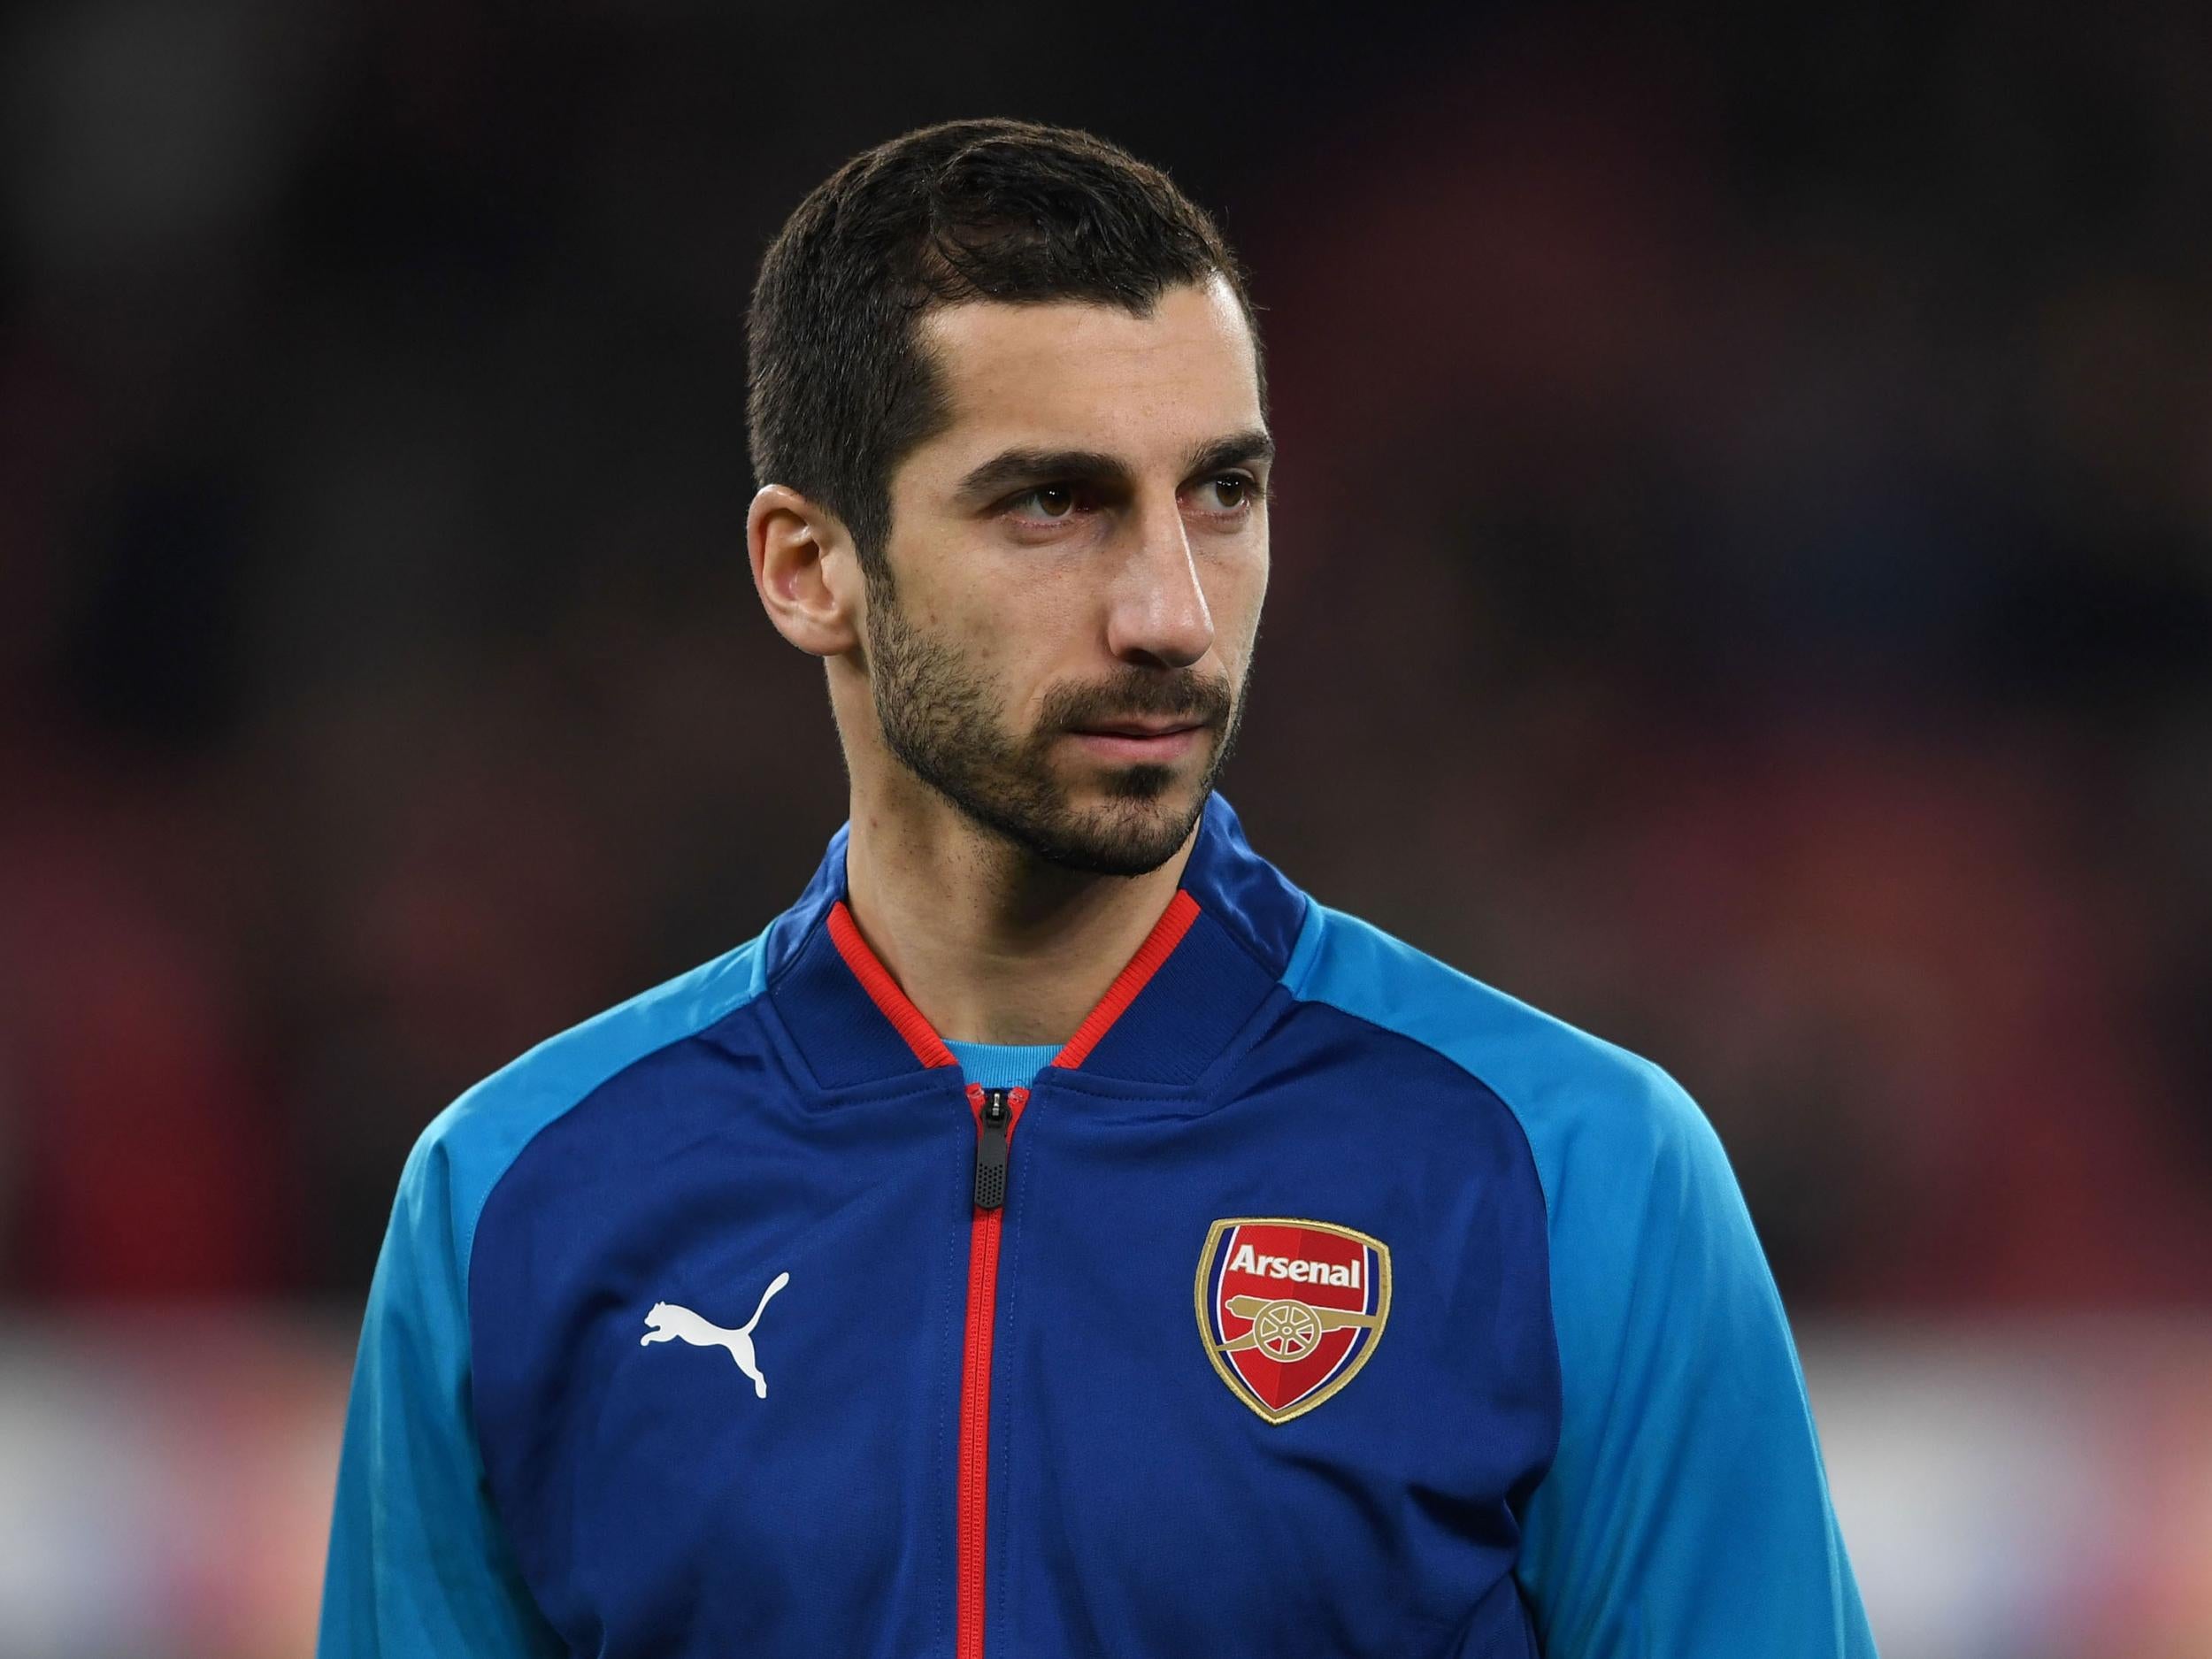 Henrikh Mkhitaryan swapped Old Trafford for the Emirates in January